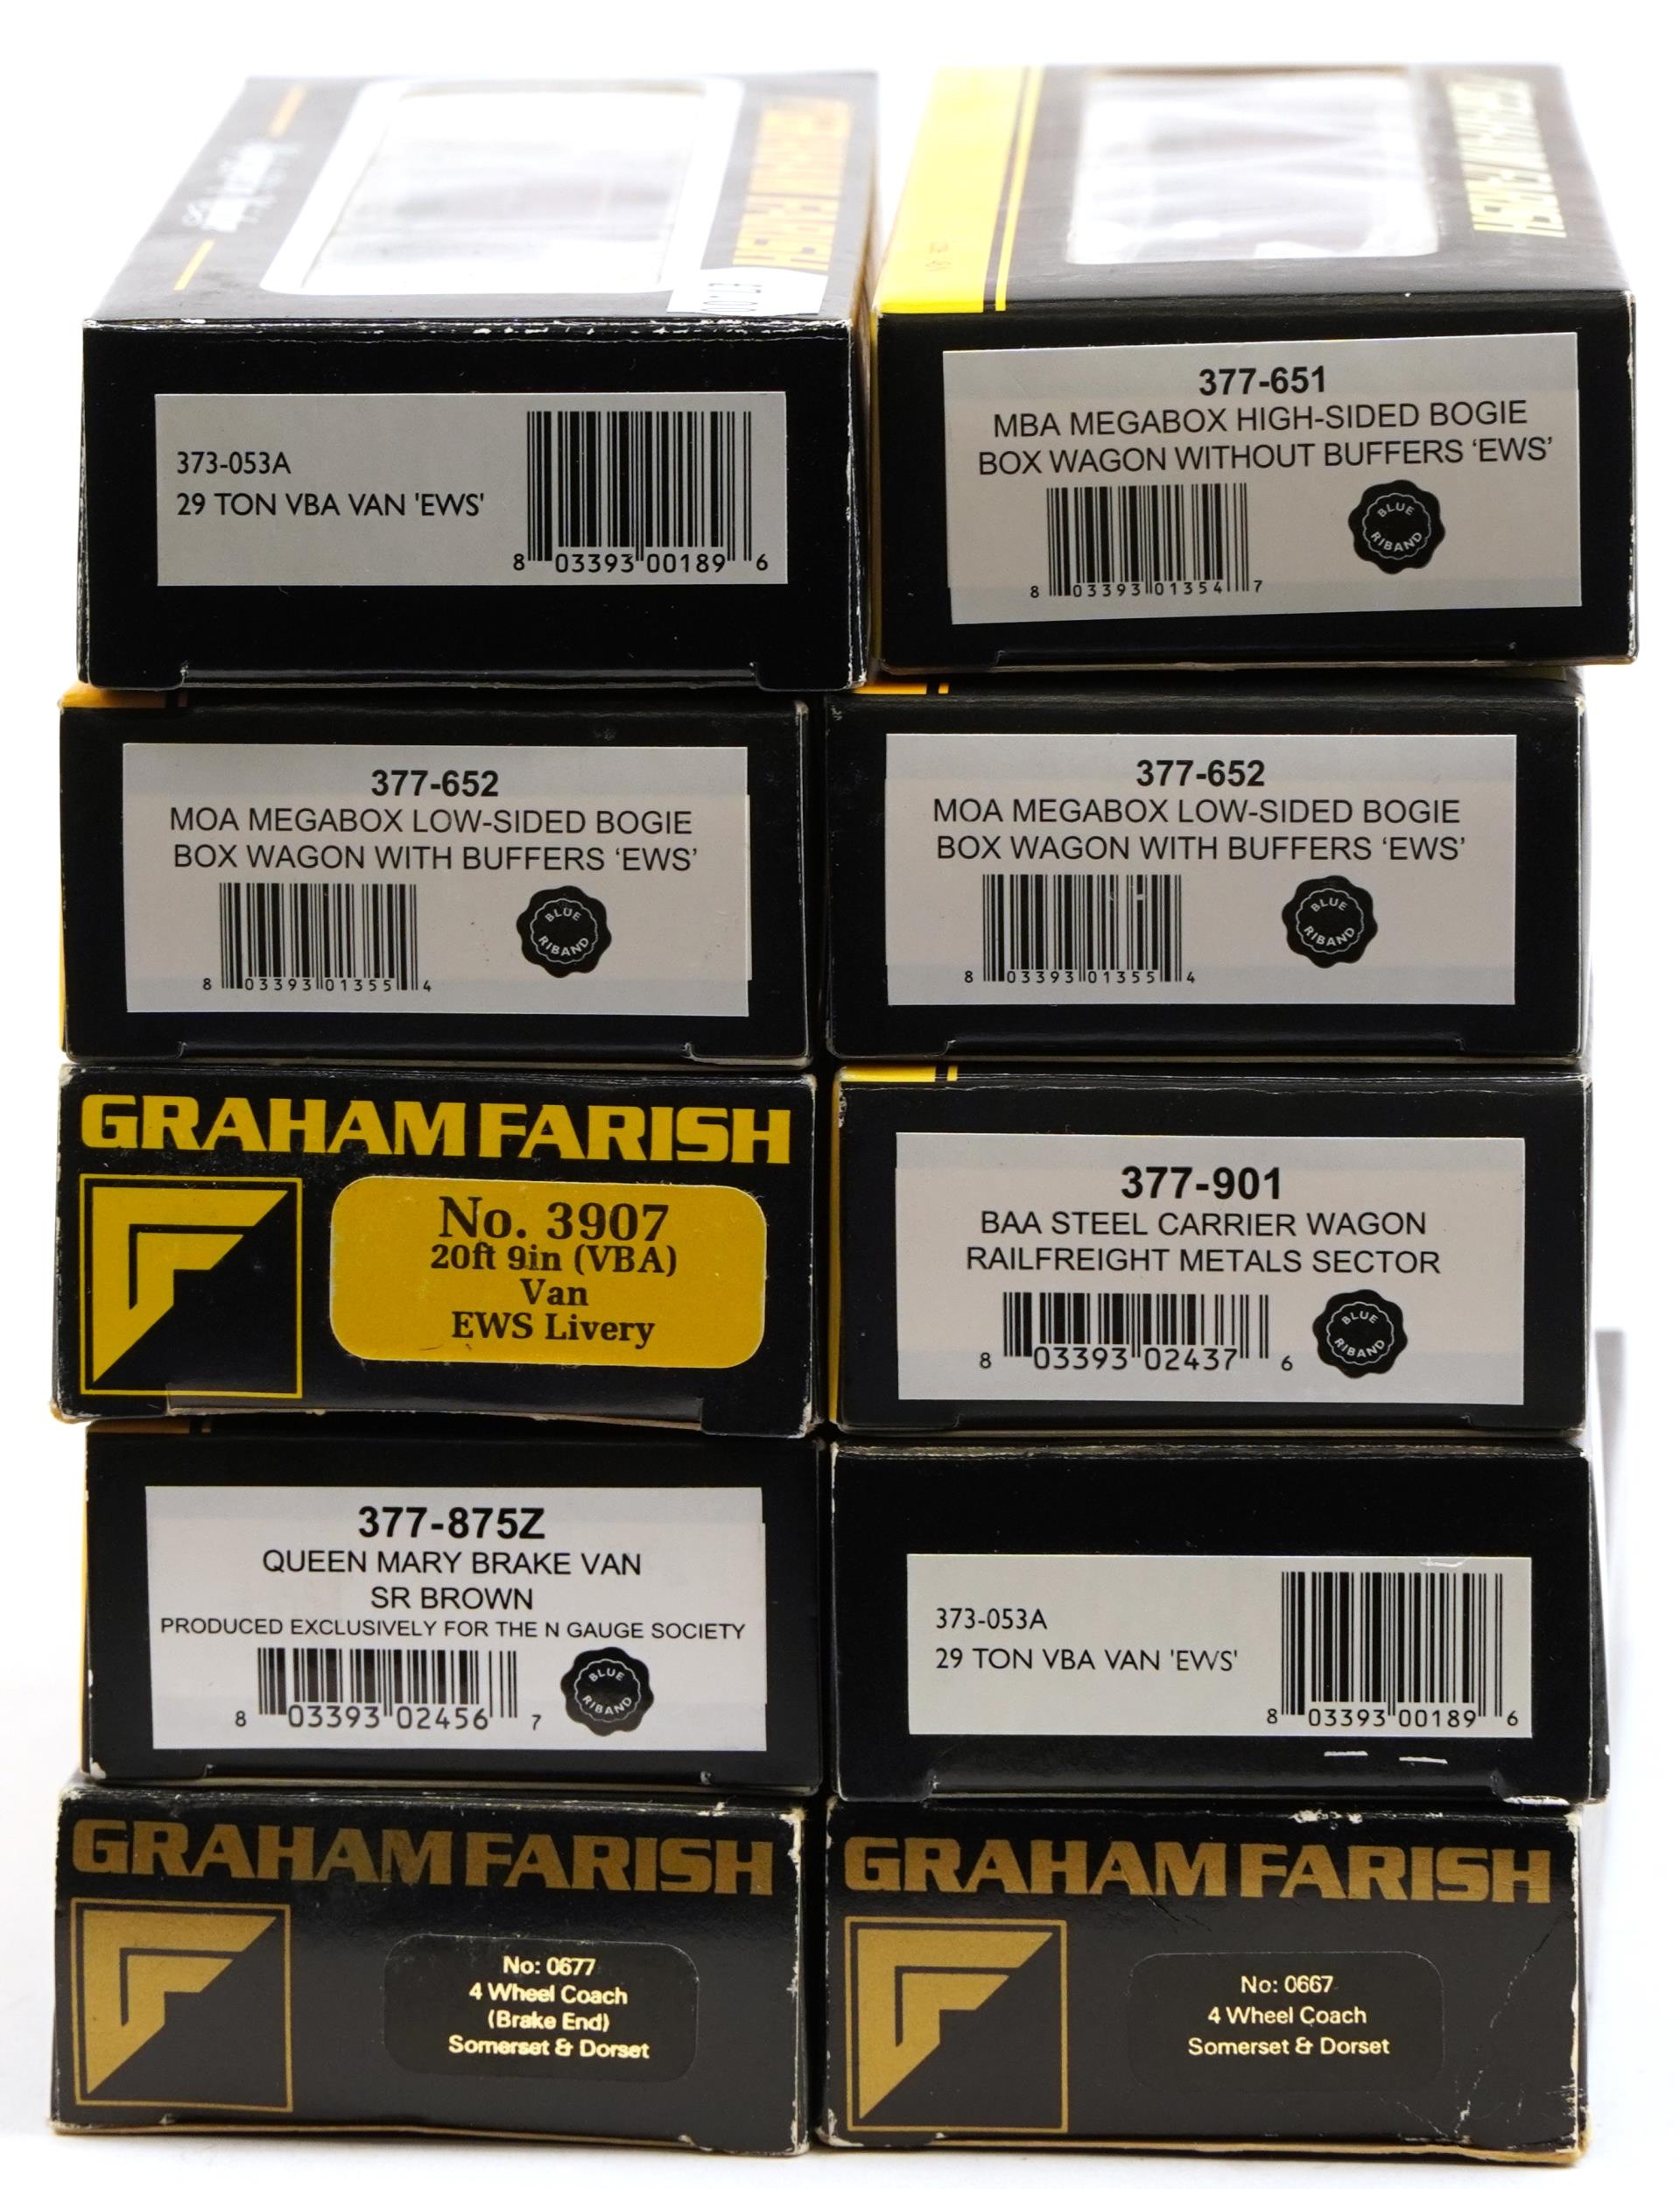 Ten Graham Farish N gauge model railway wagons with boxes, numbers 0667, 0677, 3907, 373-053A, 373- - Image 5 of 5